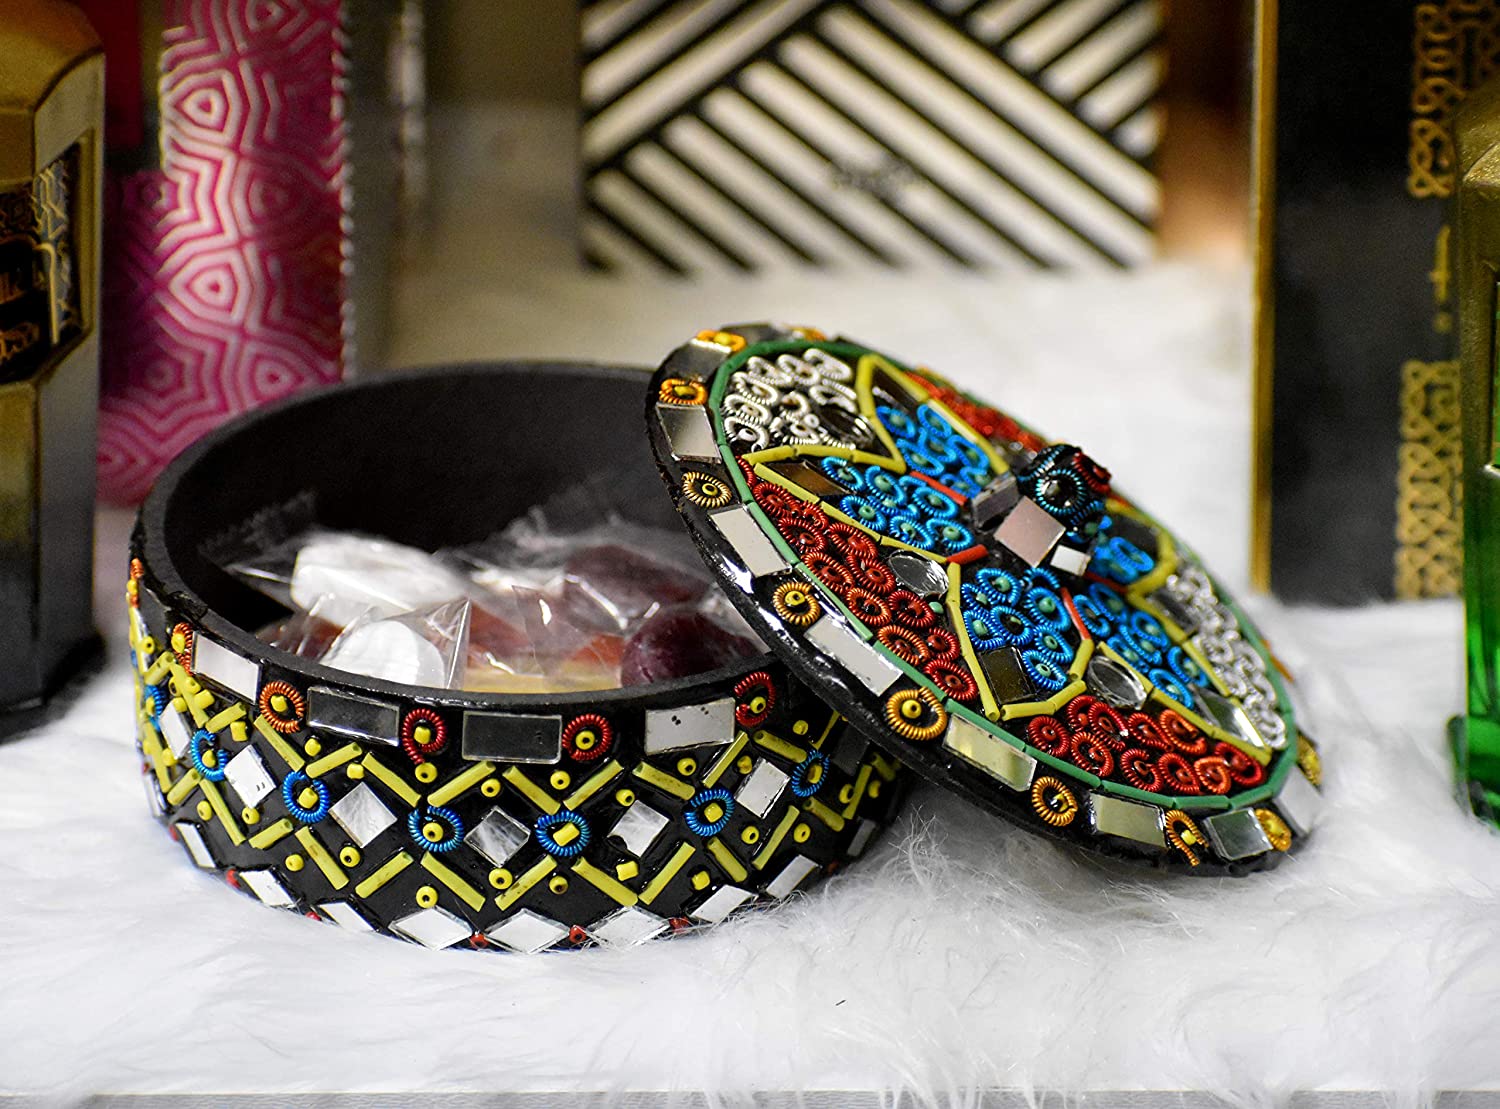 Decorative Bowl with Lid Shisha Moti Beads and Mirror Work Decorated with Mirror Mosaics [6 inches]